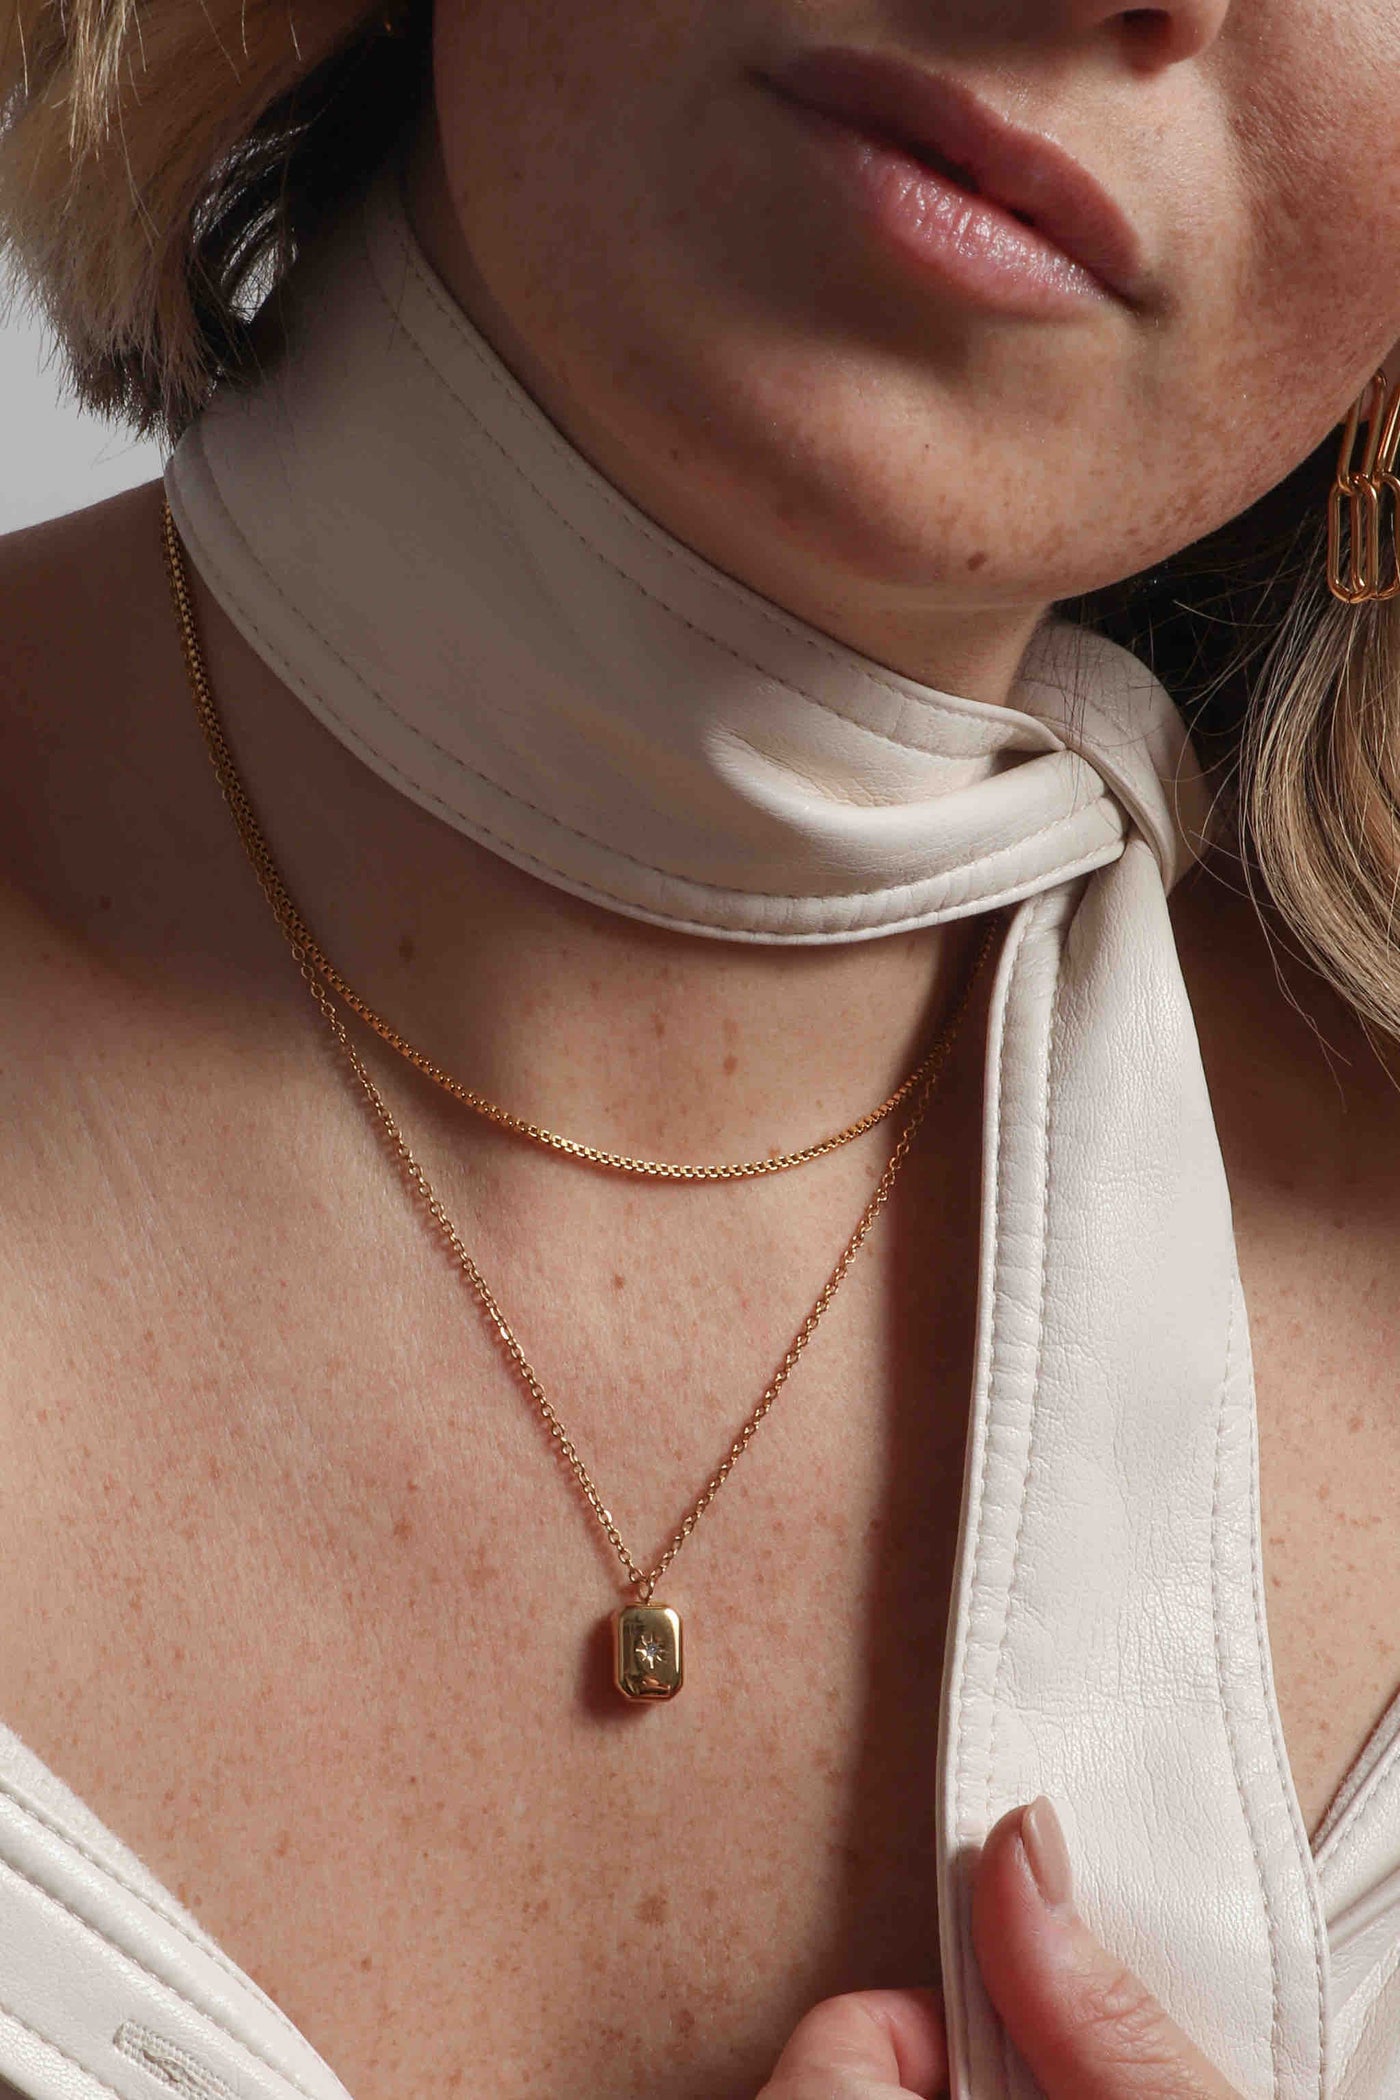 Delicate 14k gold plated stainless steel, hypoallergenic, water resistant, non tarnish, waterproof, rust resistant jewelry by Marrin Costello, featuring our classic paperclip chain Whitney Drop earrings, twisted vintage inspired 5mm rope chain Helix Bracelet, adjustable box chain Nile Choker, and CZ simulated diamond inlaid square signet pendant on a delicate round link chain necklace, styled with a cream vegan leather jacket and neck tie